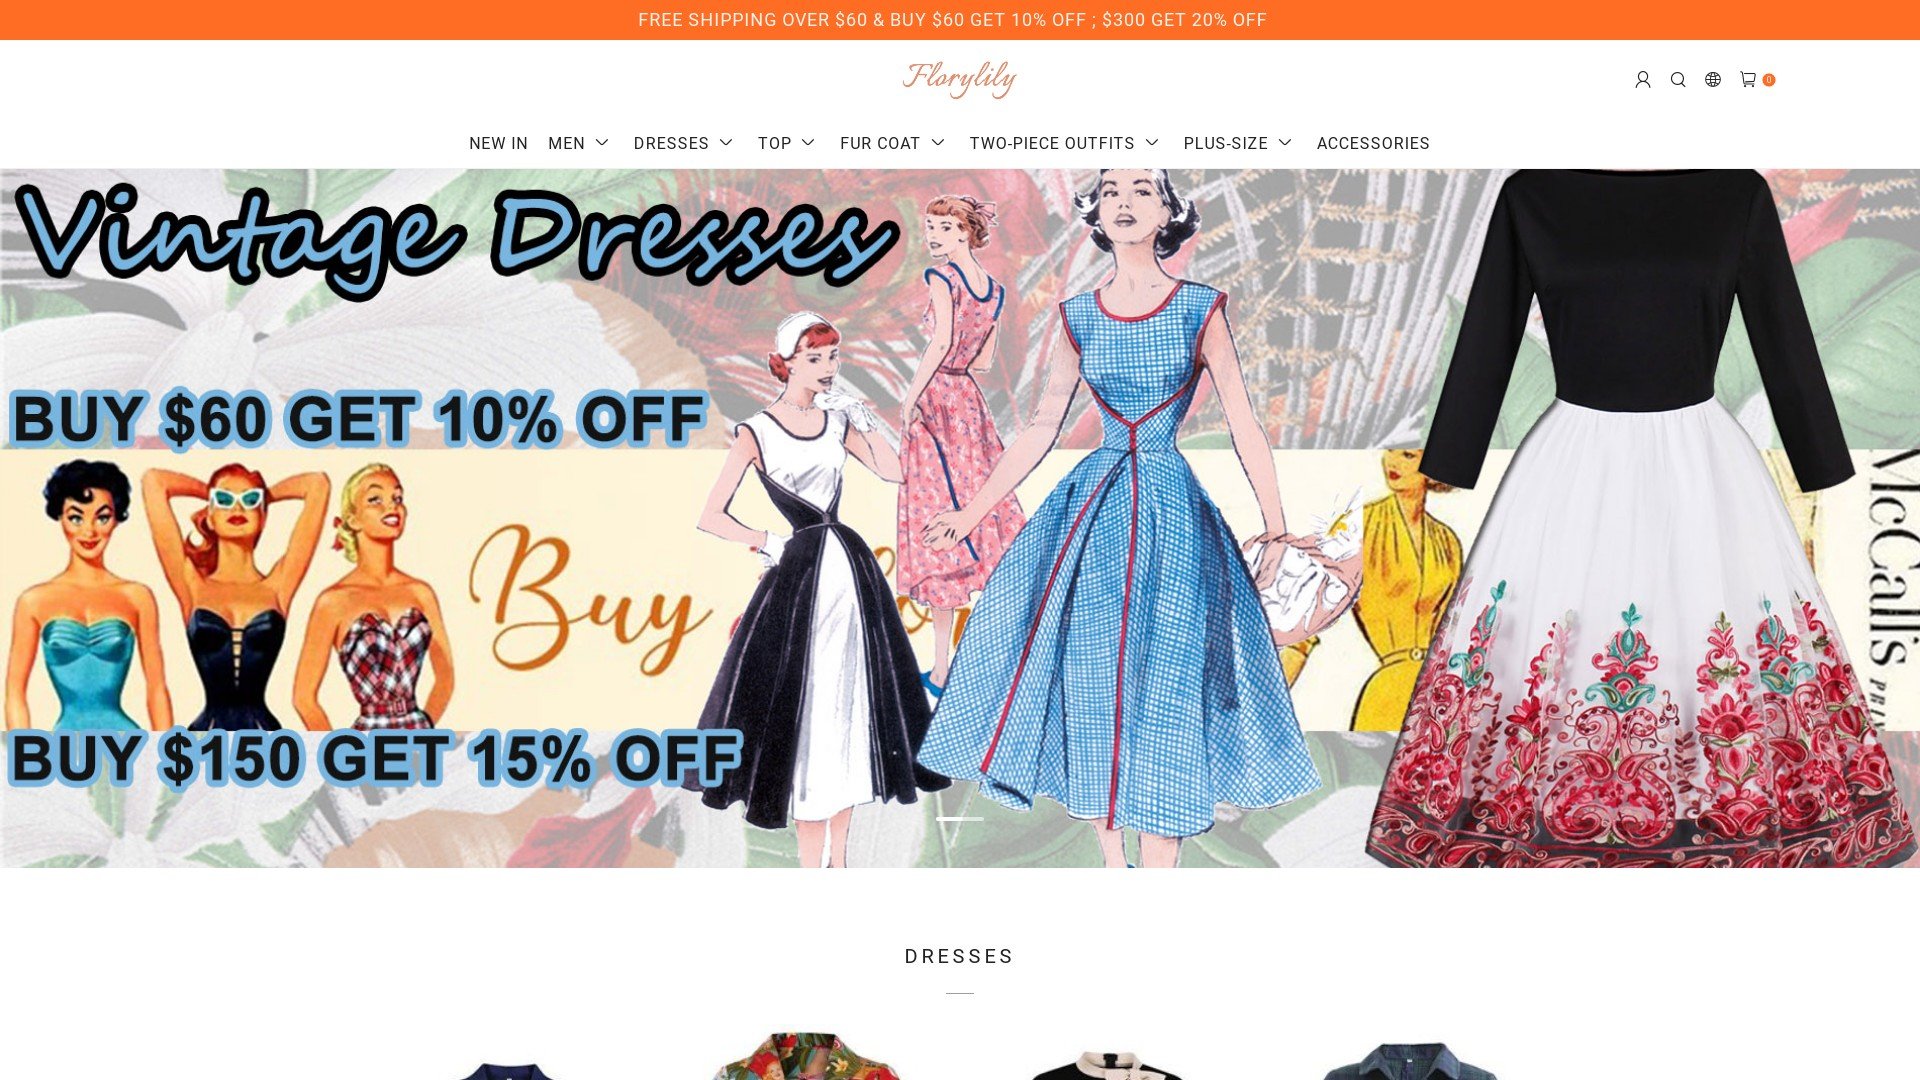 Florylily at florylily.com